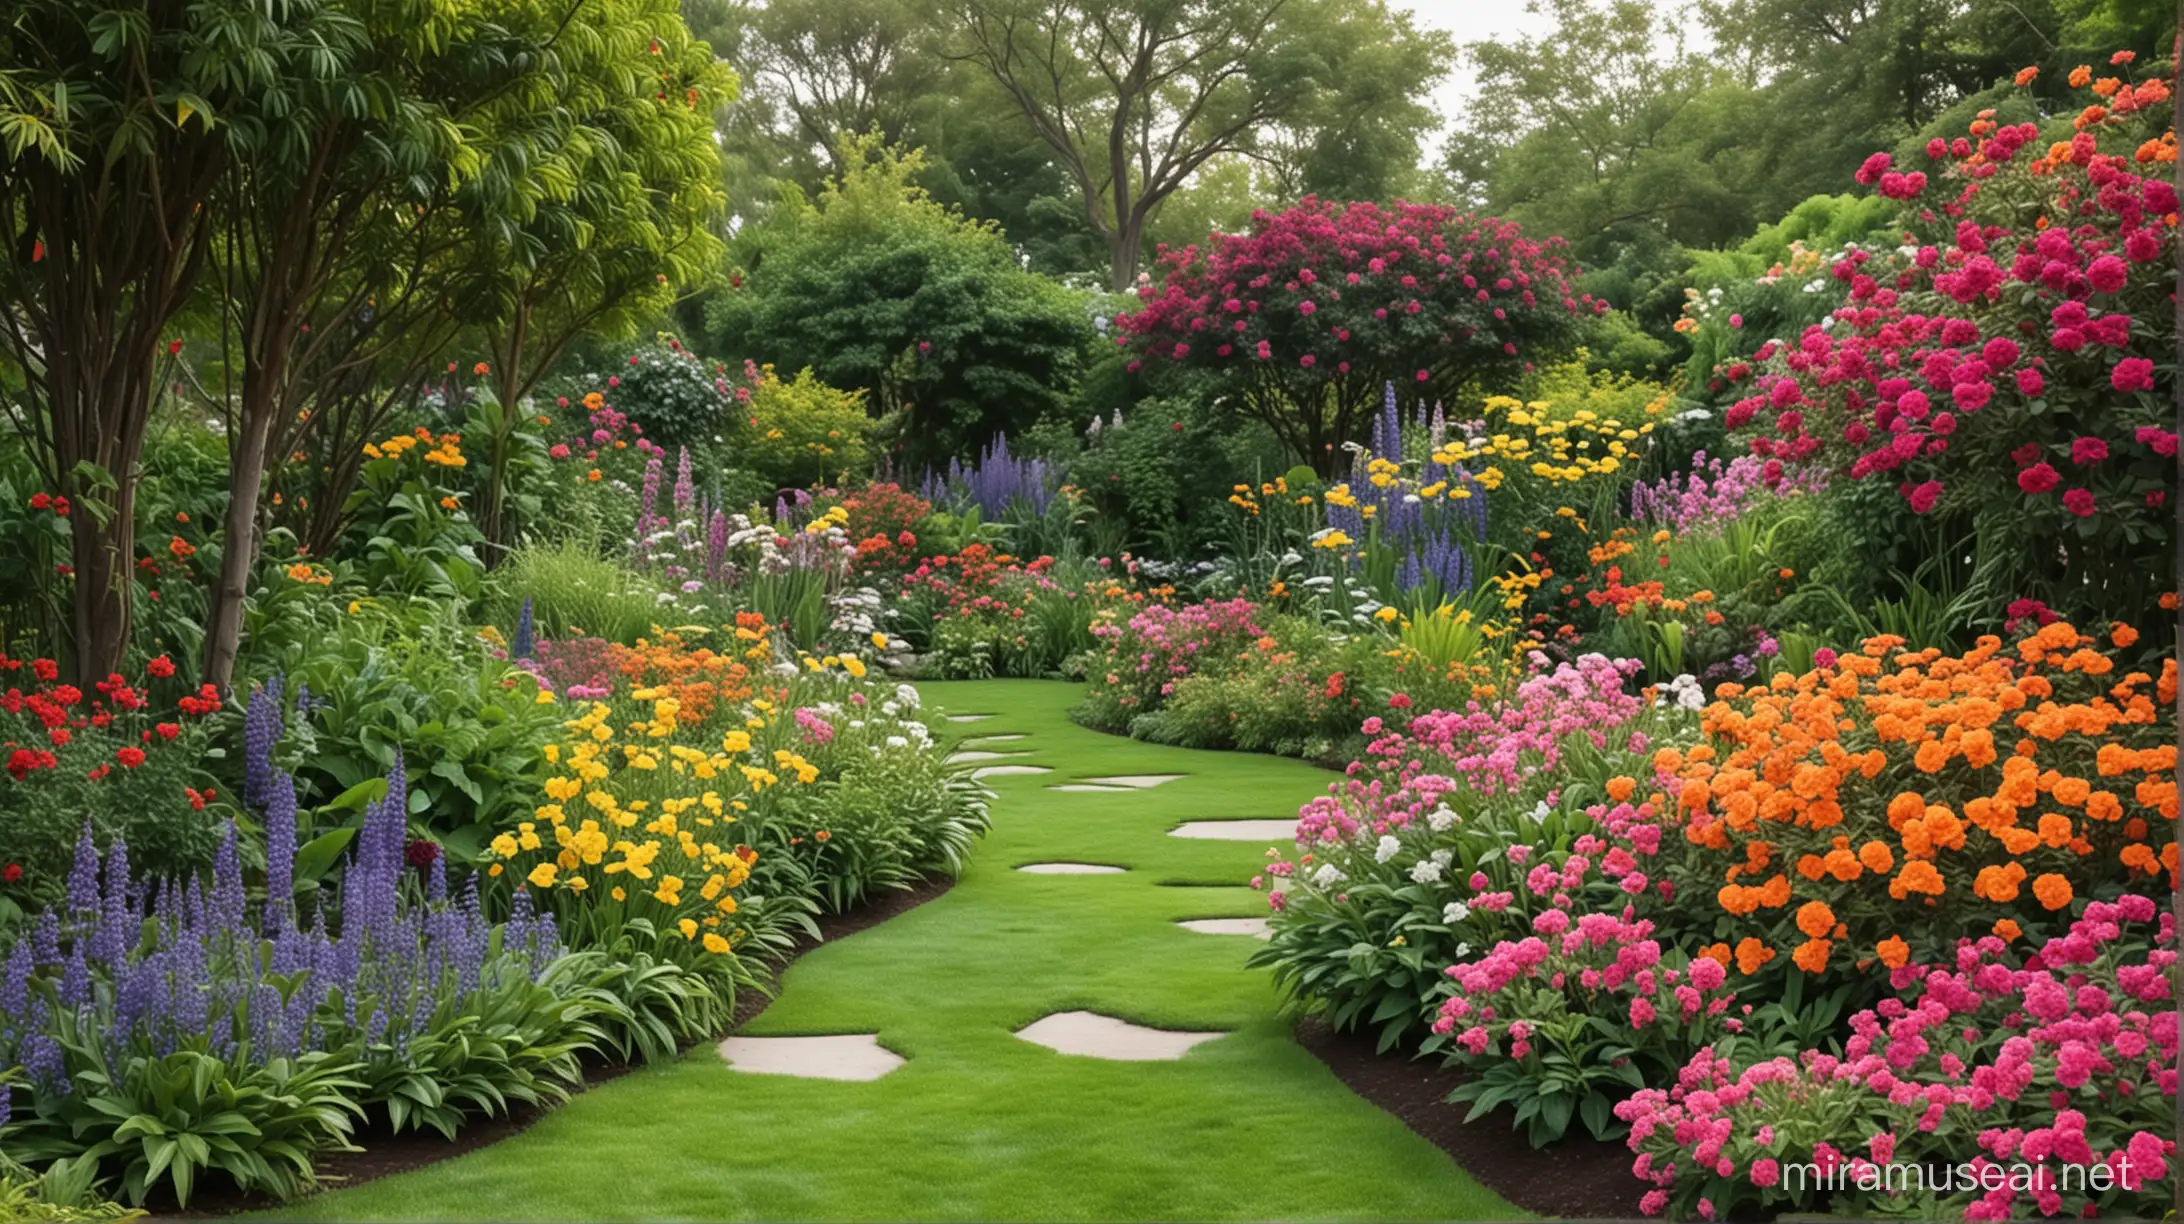 A lush garden, with colorful flowers in bloom, birds chirping in the background, and a gentle breeze swaying the leaves, evoking a sense of harmony and rejuvenation